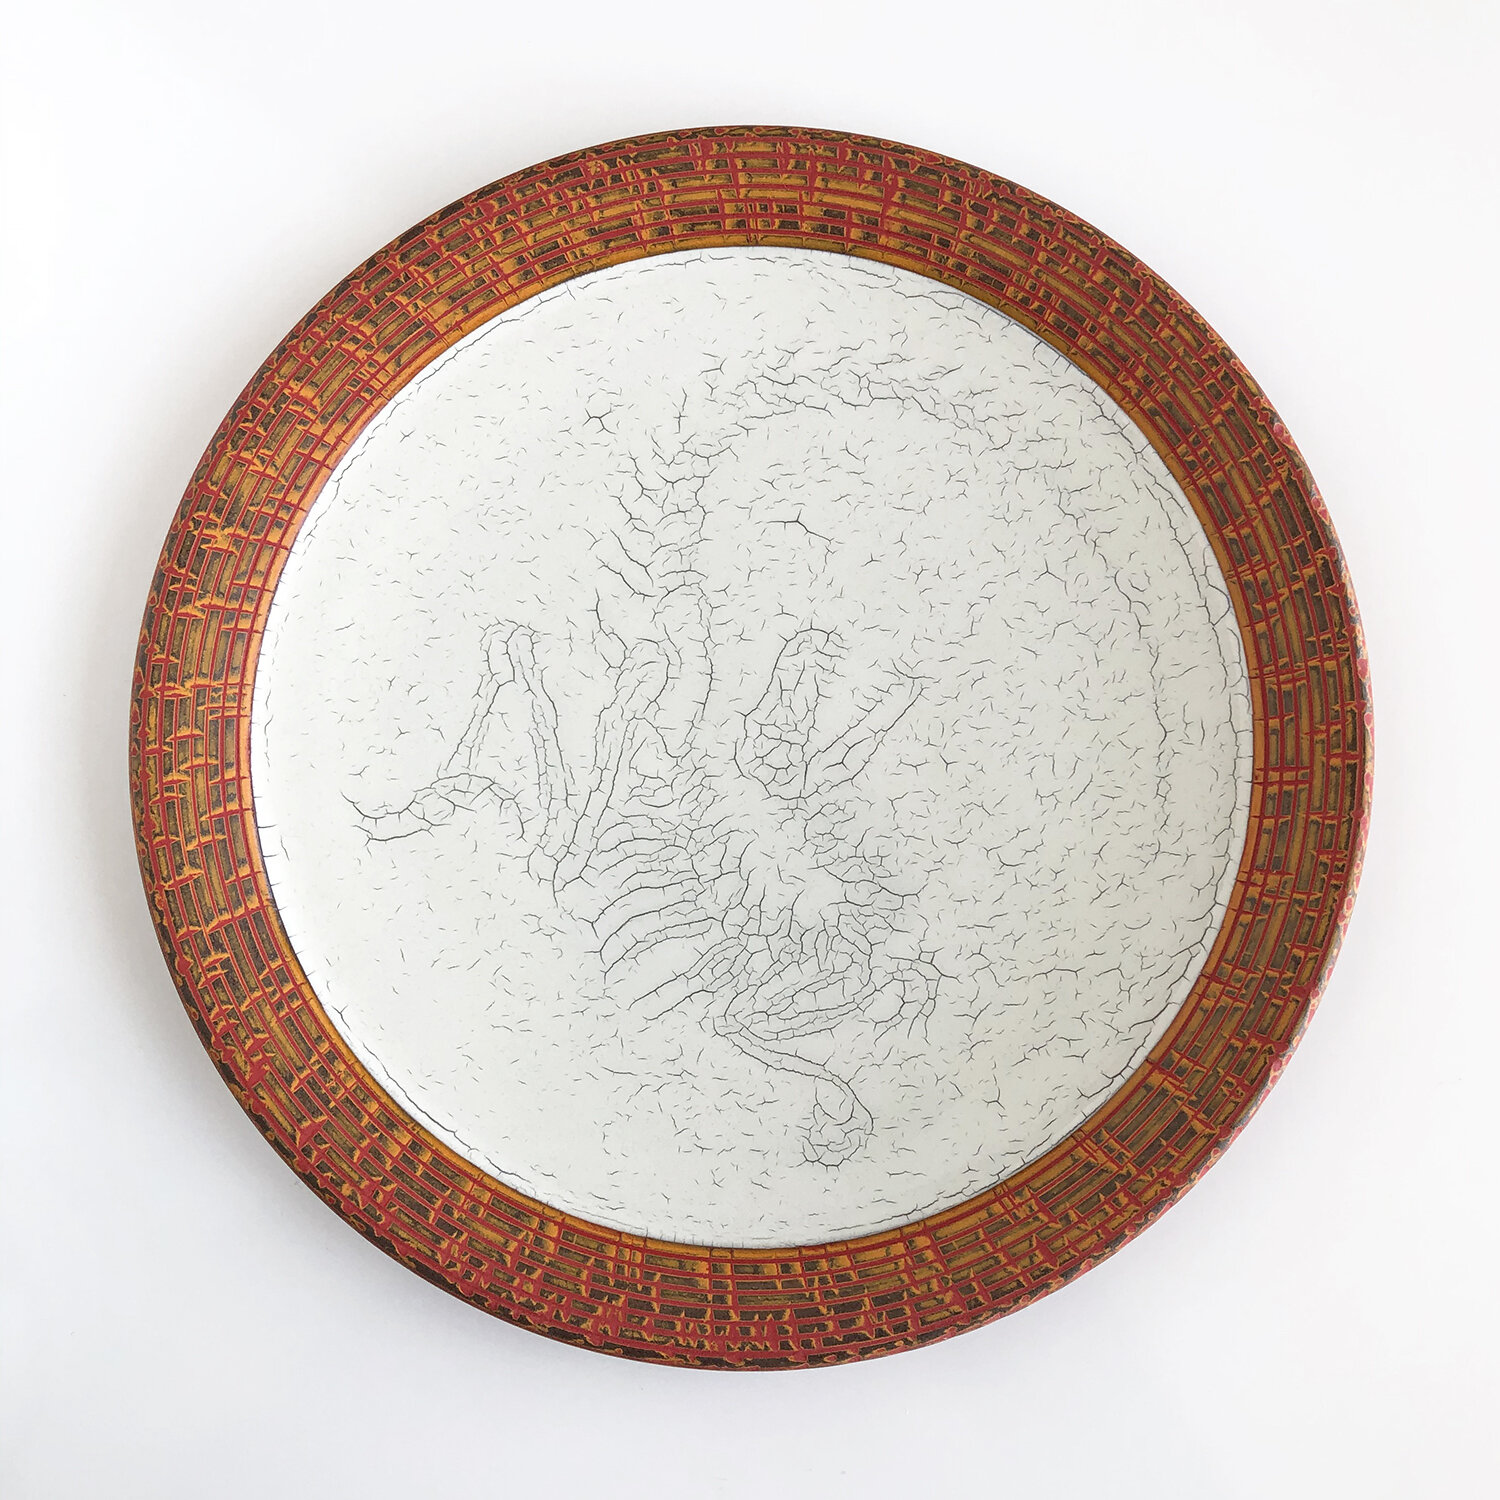 Crackle "Fossil" dinner plate